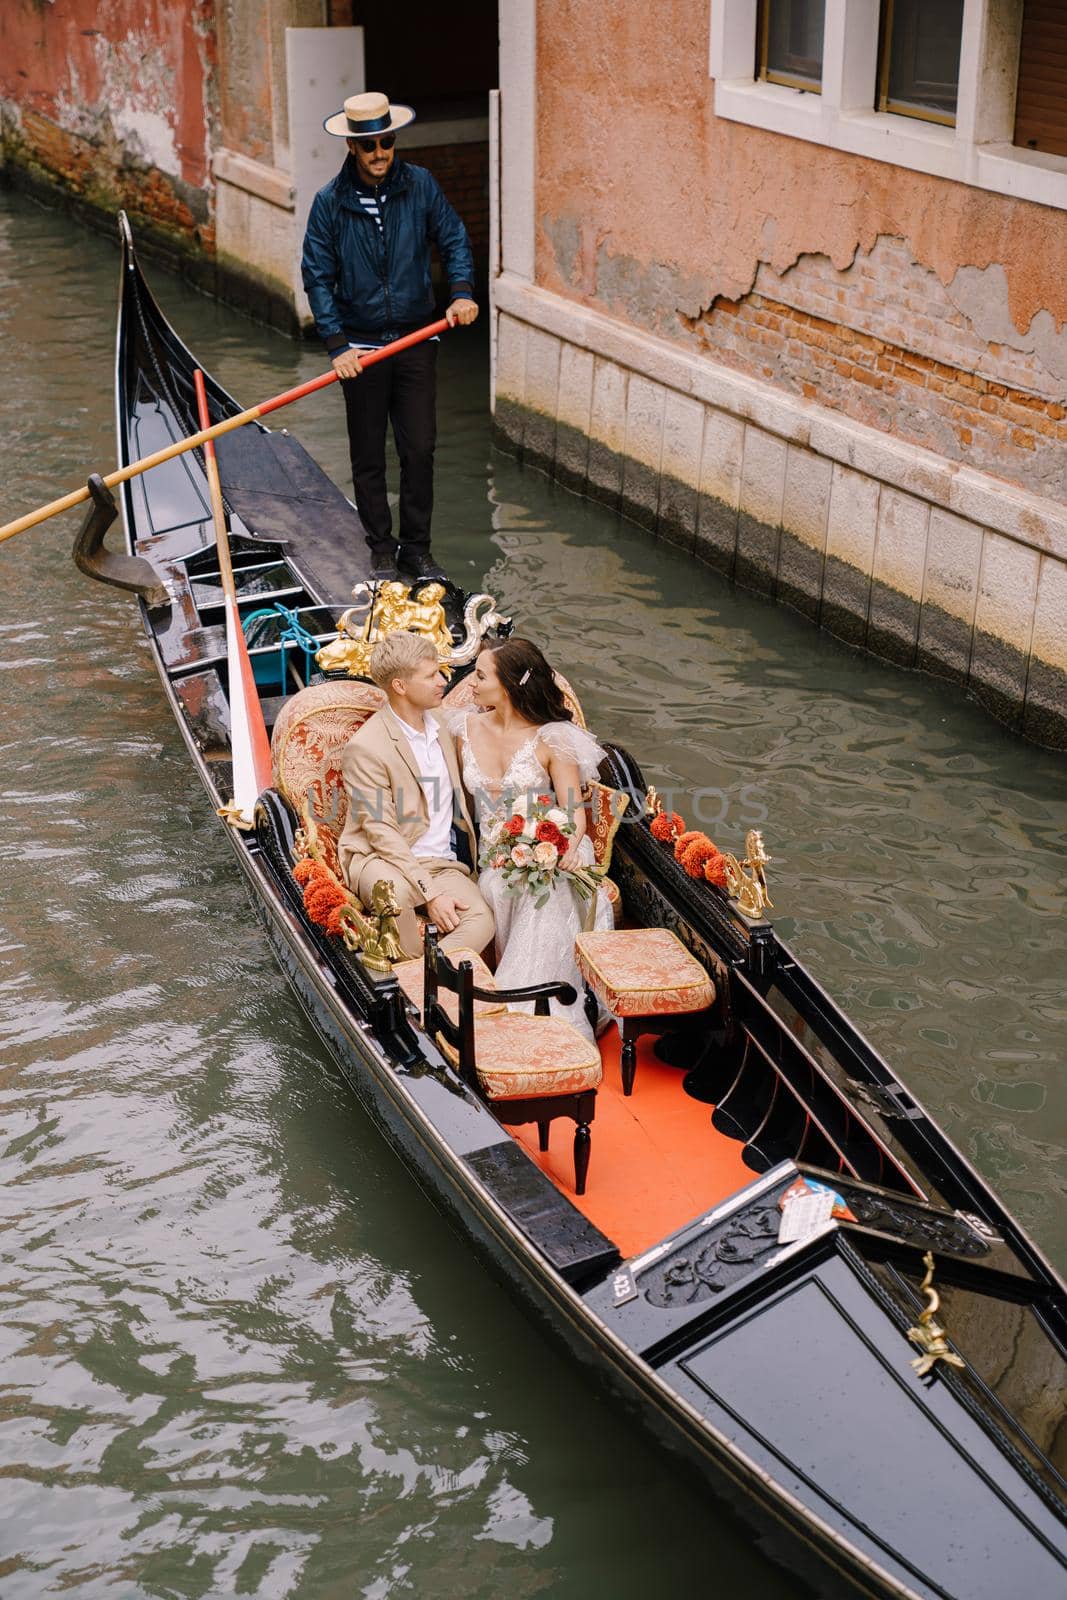 The gondolier rides the bride and groom in a classic wooden gondola along a narrow Venetian canal. Newlyweds sit in a boat and want to kiss.